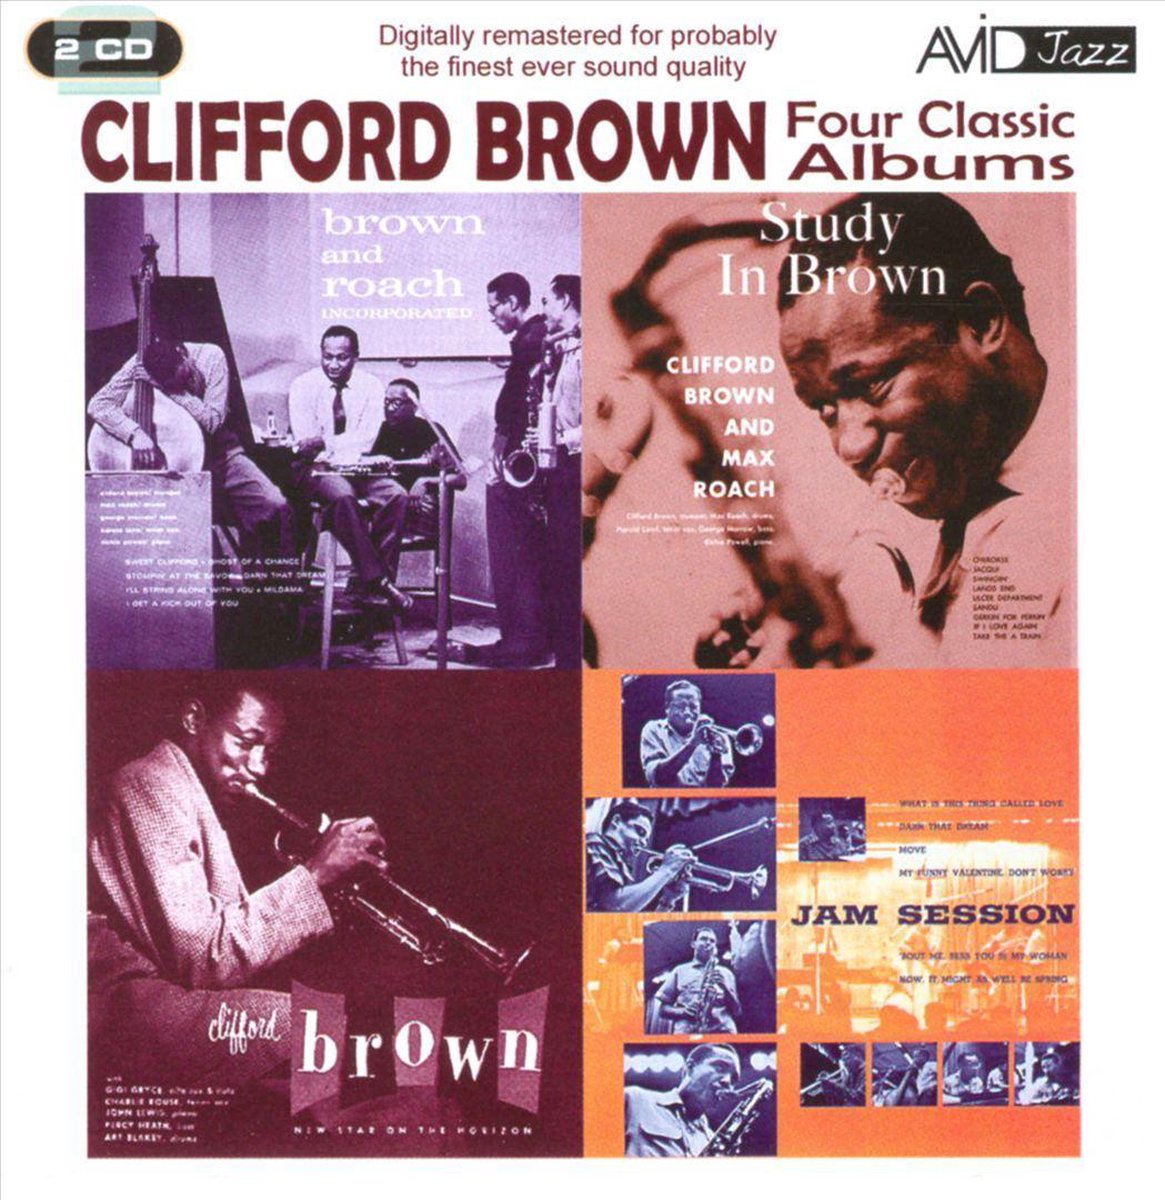 Four Classic Albums (Brown And Roach Inc / Jam Session / Study In Brown / New Star On The Horizon) - Clifford Brown